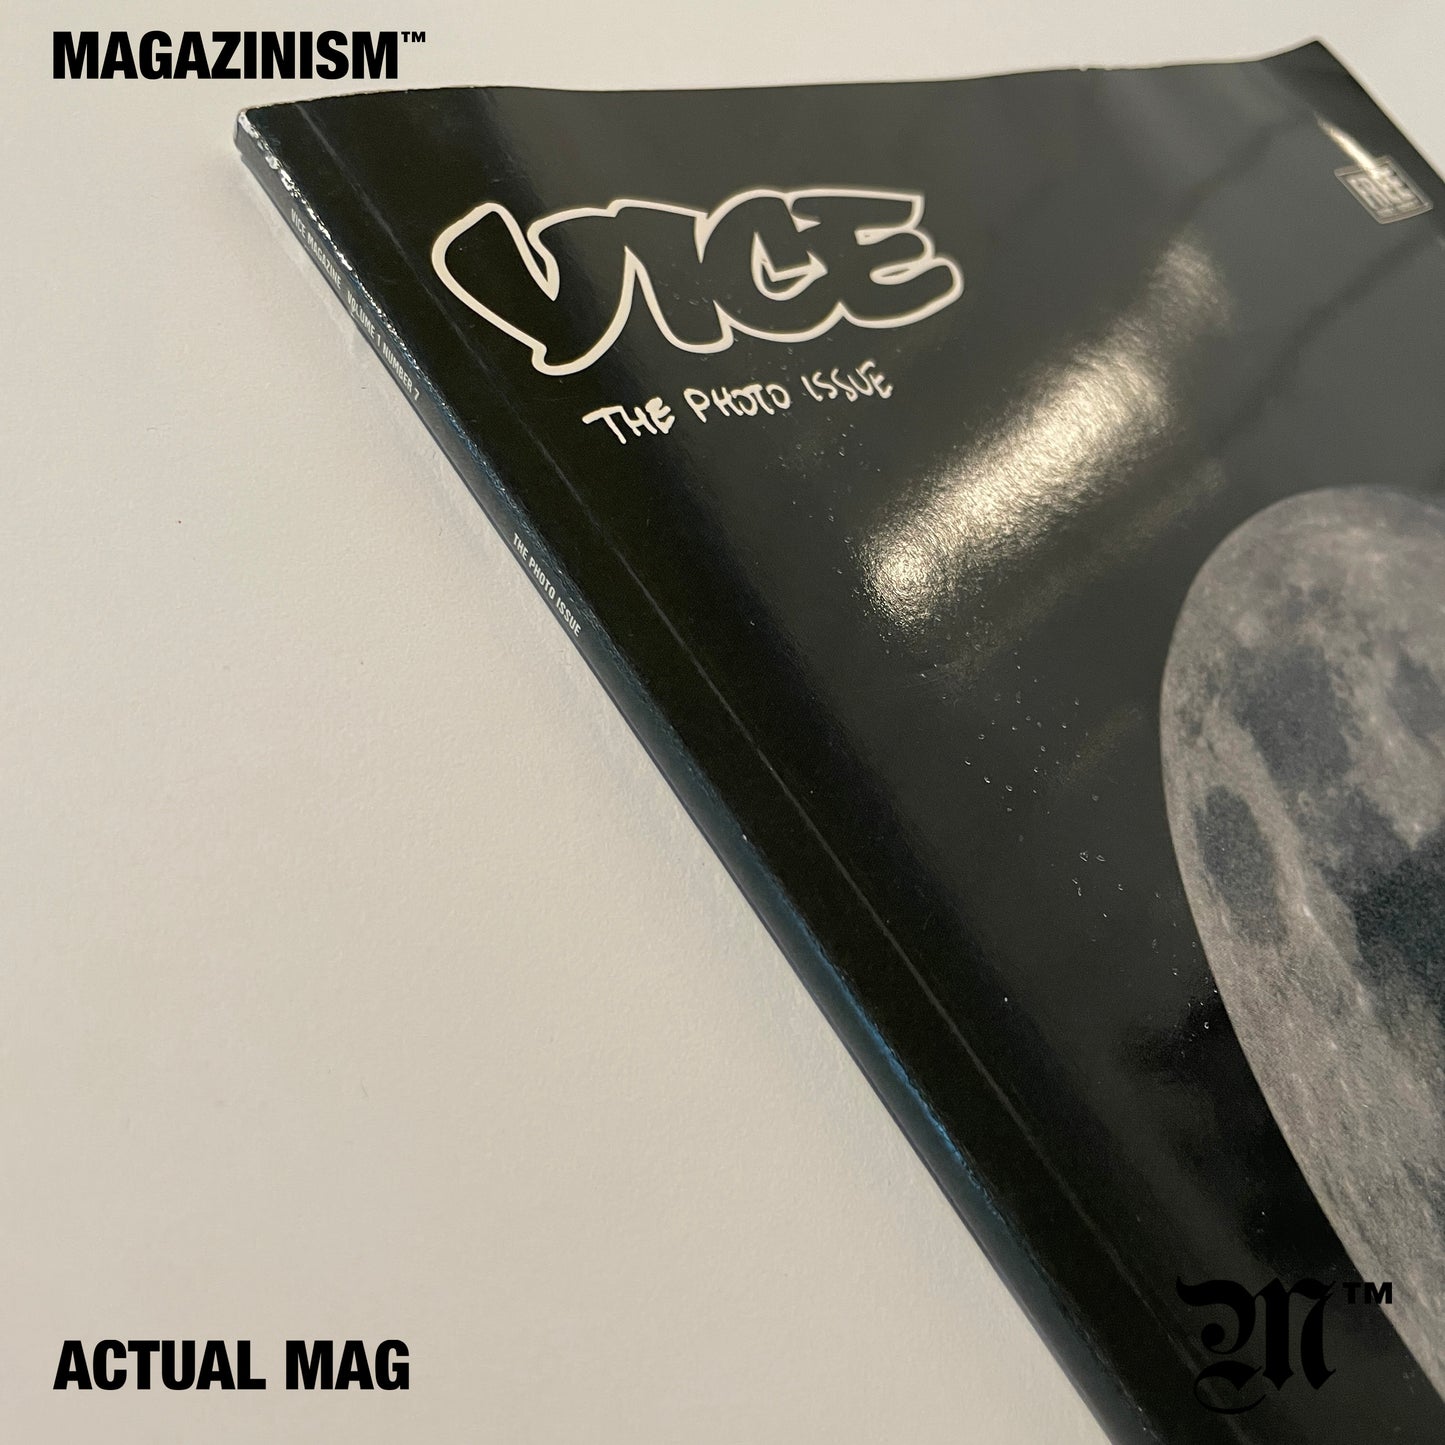 Vice - The Photo Issue 2003